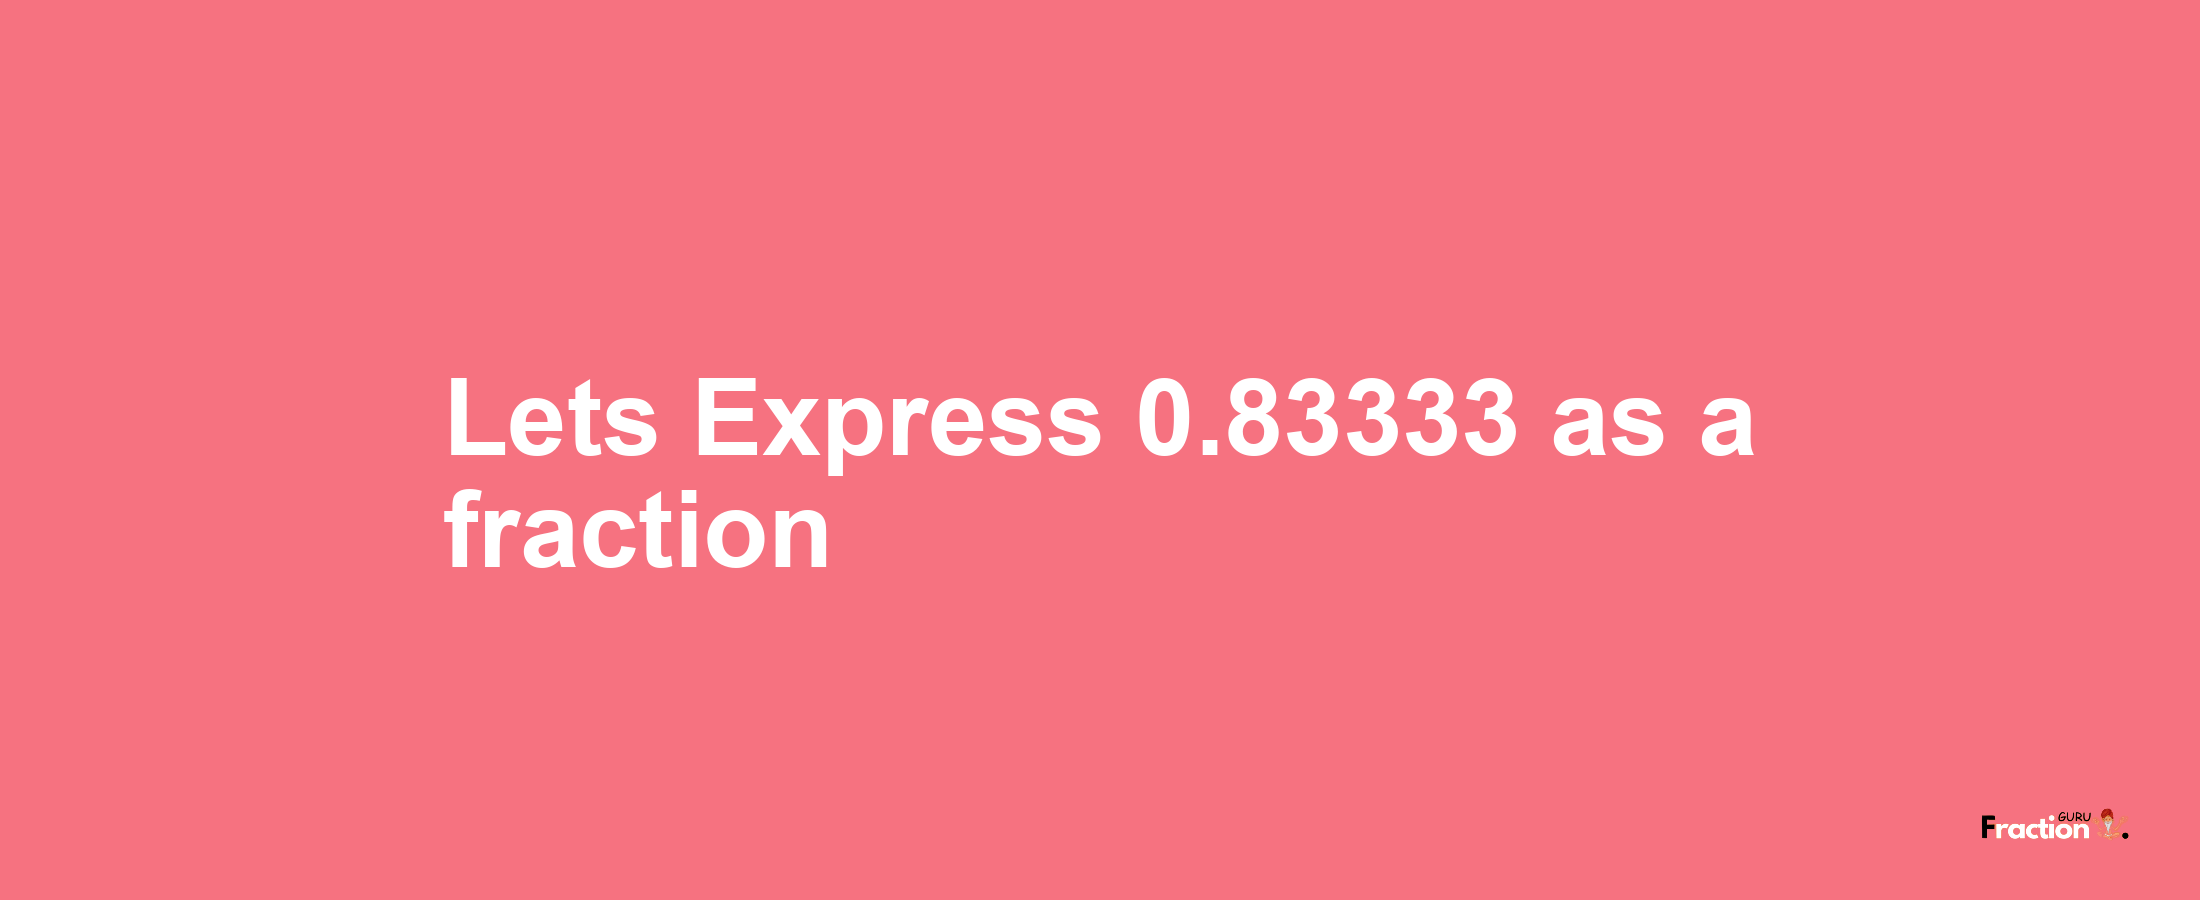 Lets Express 0.83333 as afraction